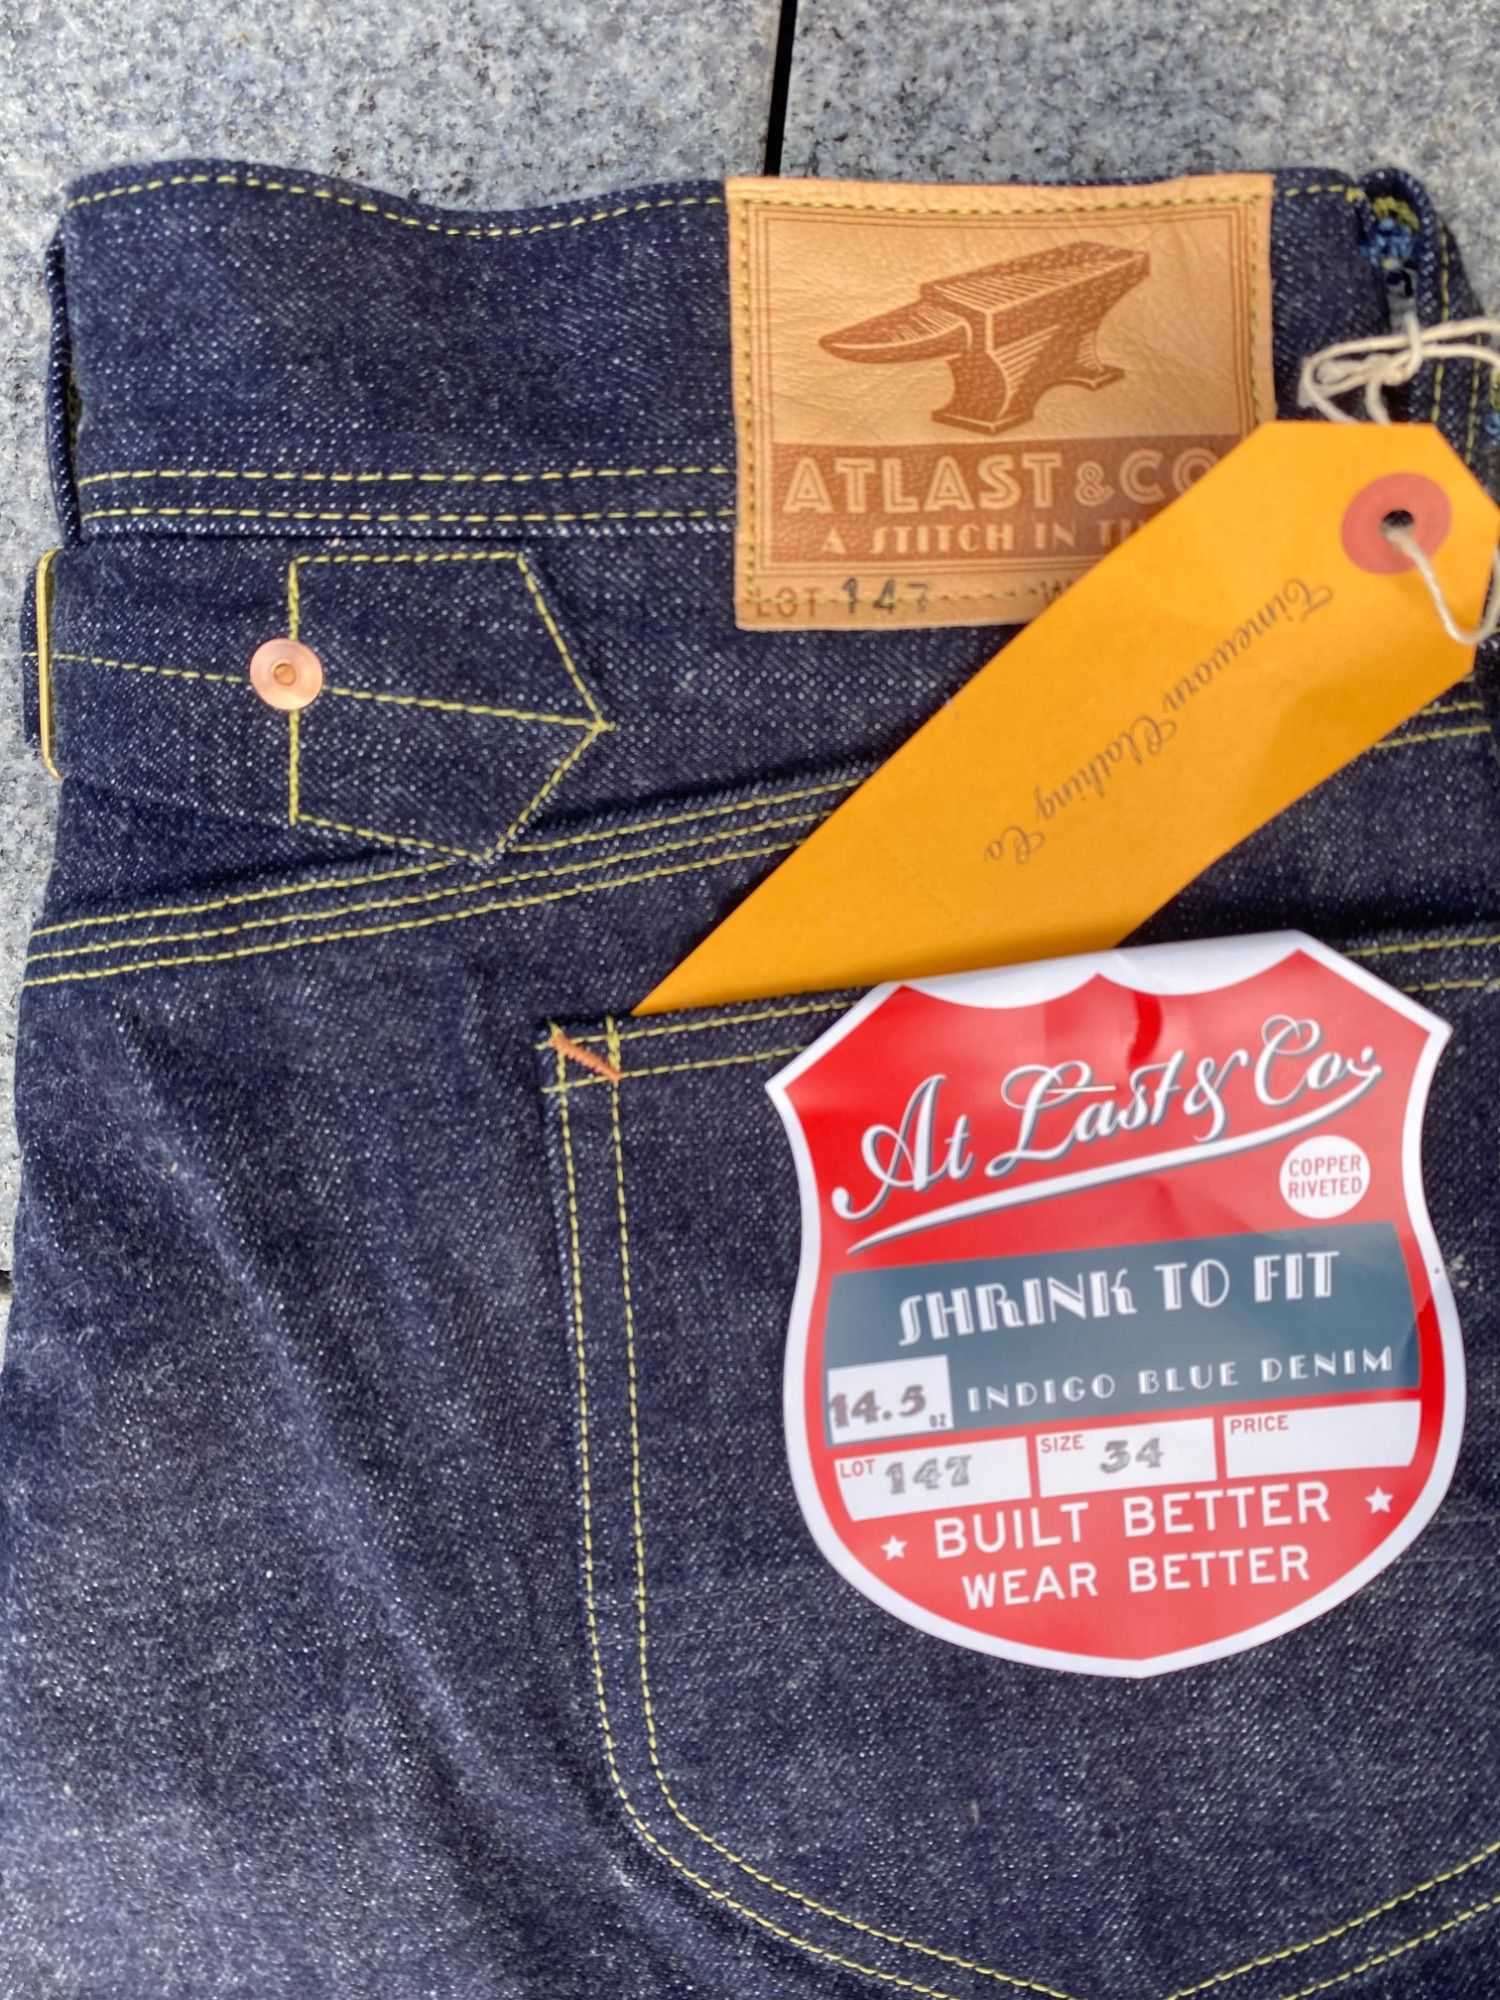 atlast&co , butcher products , timeworn clothing - Page 15 - superdenim ...